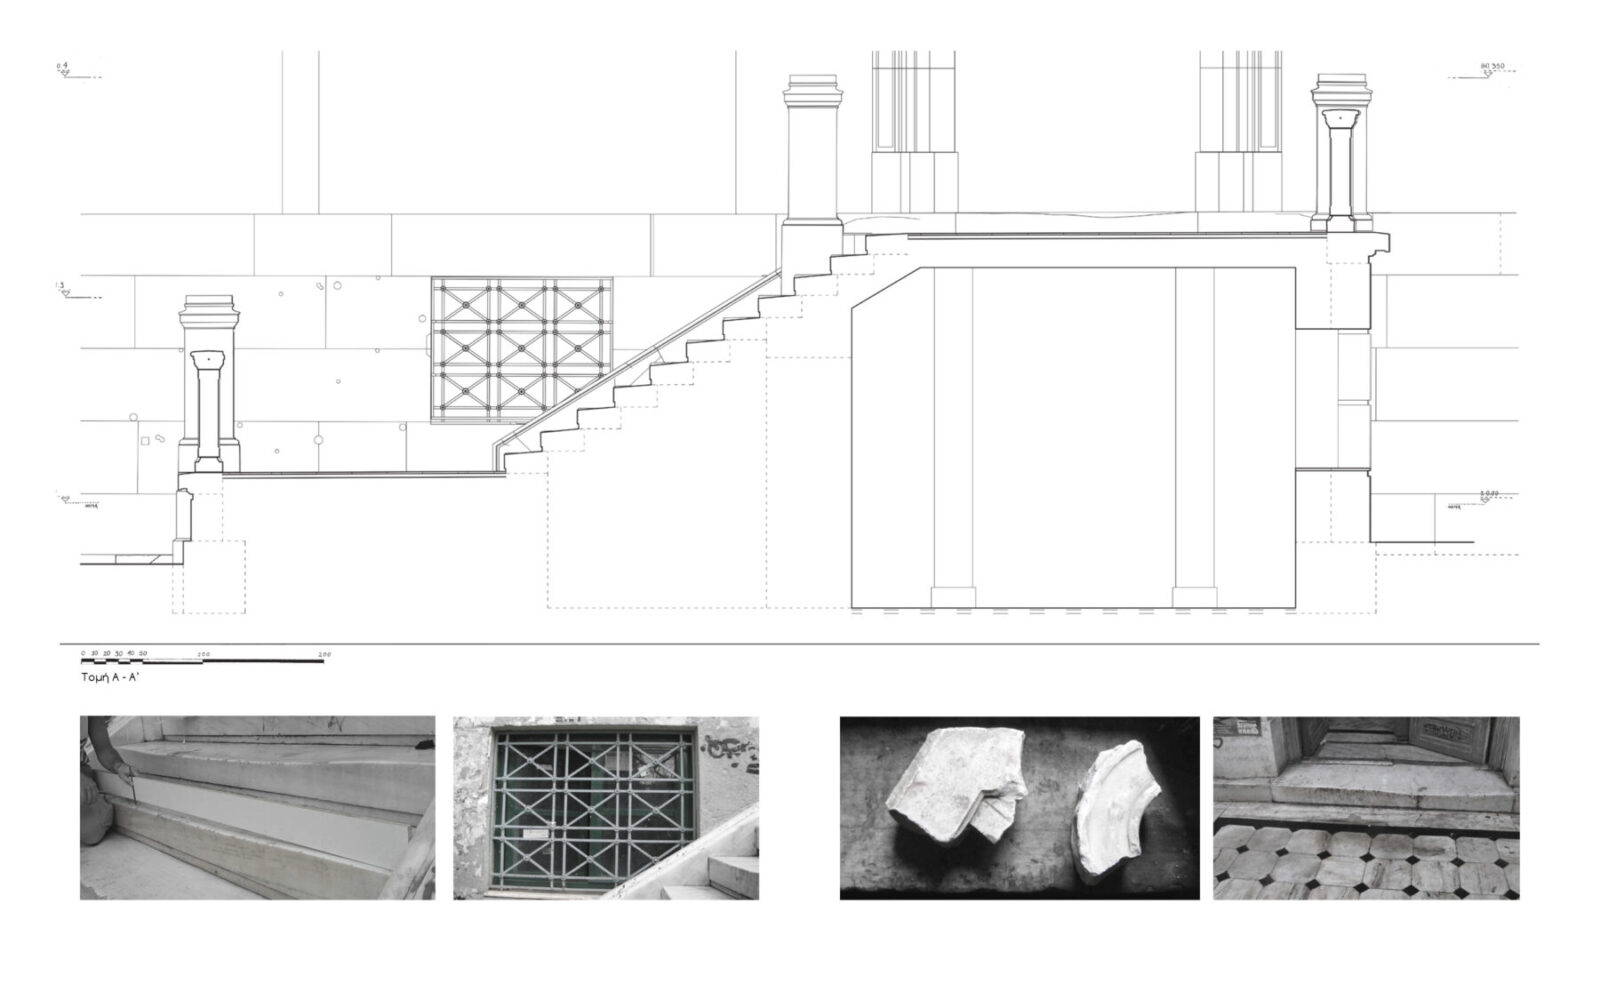 Archisearch Restoration of historic stairs at Gini bulding of National Technical University of Athens | Student project by Petros Petrakis, Isidoros Spanolios & Kiriakos Havakis